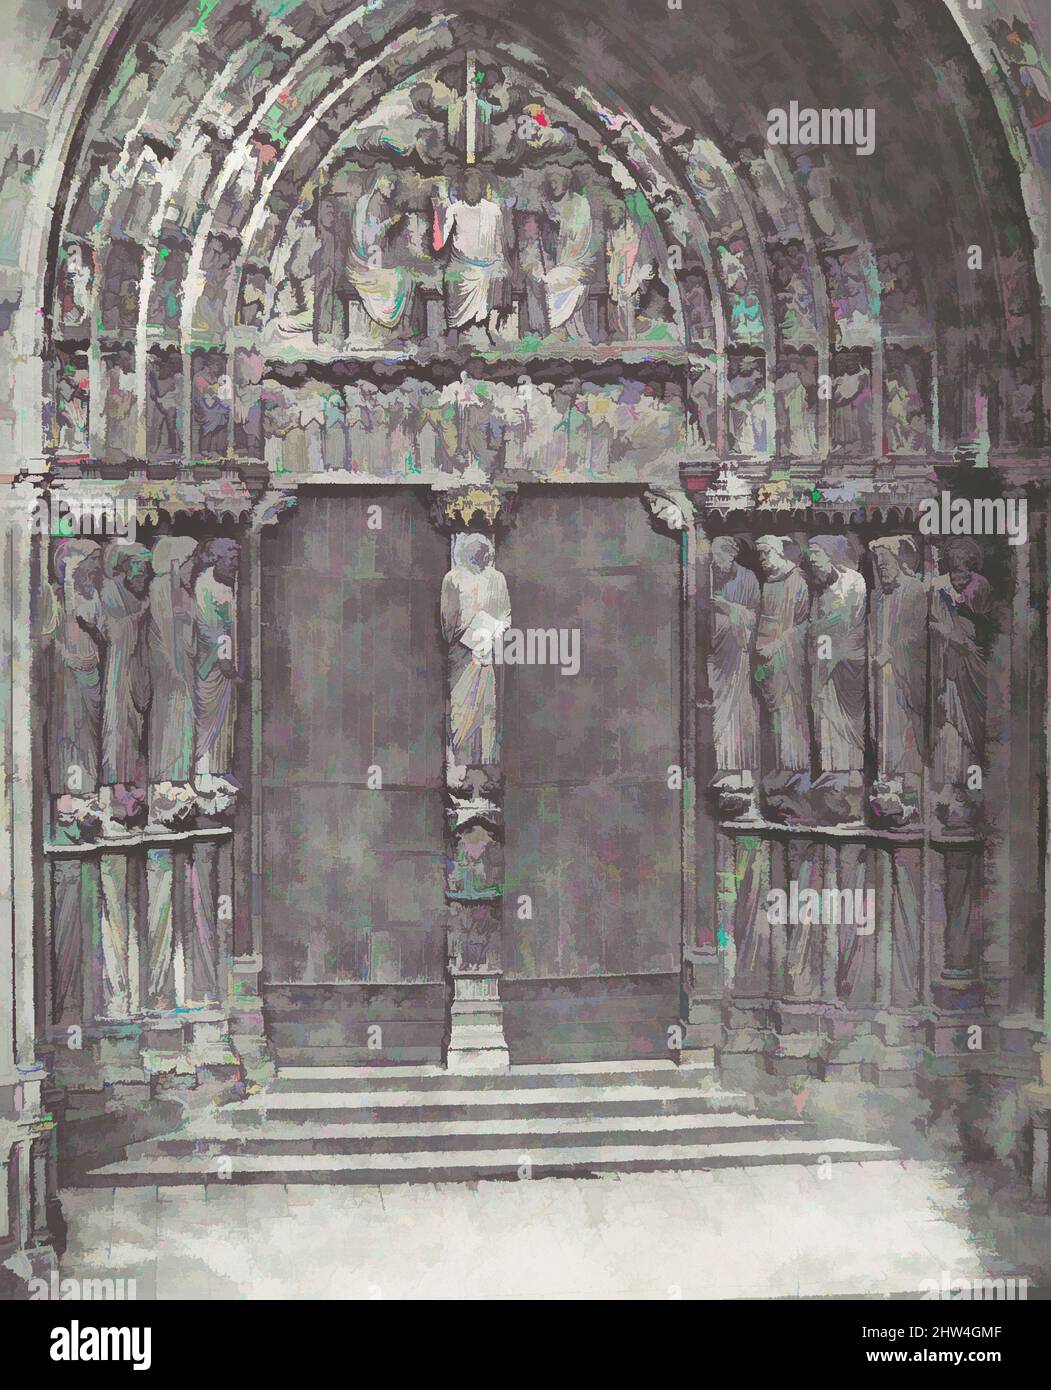 Art inspired by Chartres Cathedral, Central Portal of the South Transept; The Last Judgment, 1855, printed 1857, Photogravure, 60.0 x 48.5 cm. (23 5/8 x 19 1/16 in.), Charles Nègre (French, 1820–1880, Classic works modernized by Artotop with a splash of modernity. Shapes, color and value, eye-catching visual impact on art. Emotions through freedom of artworks in a contemporary way. A timeless message pursuing a wildly creative new direction. Artists turning to the digital medium and creating the Artotop NFT Stock Photo